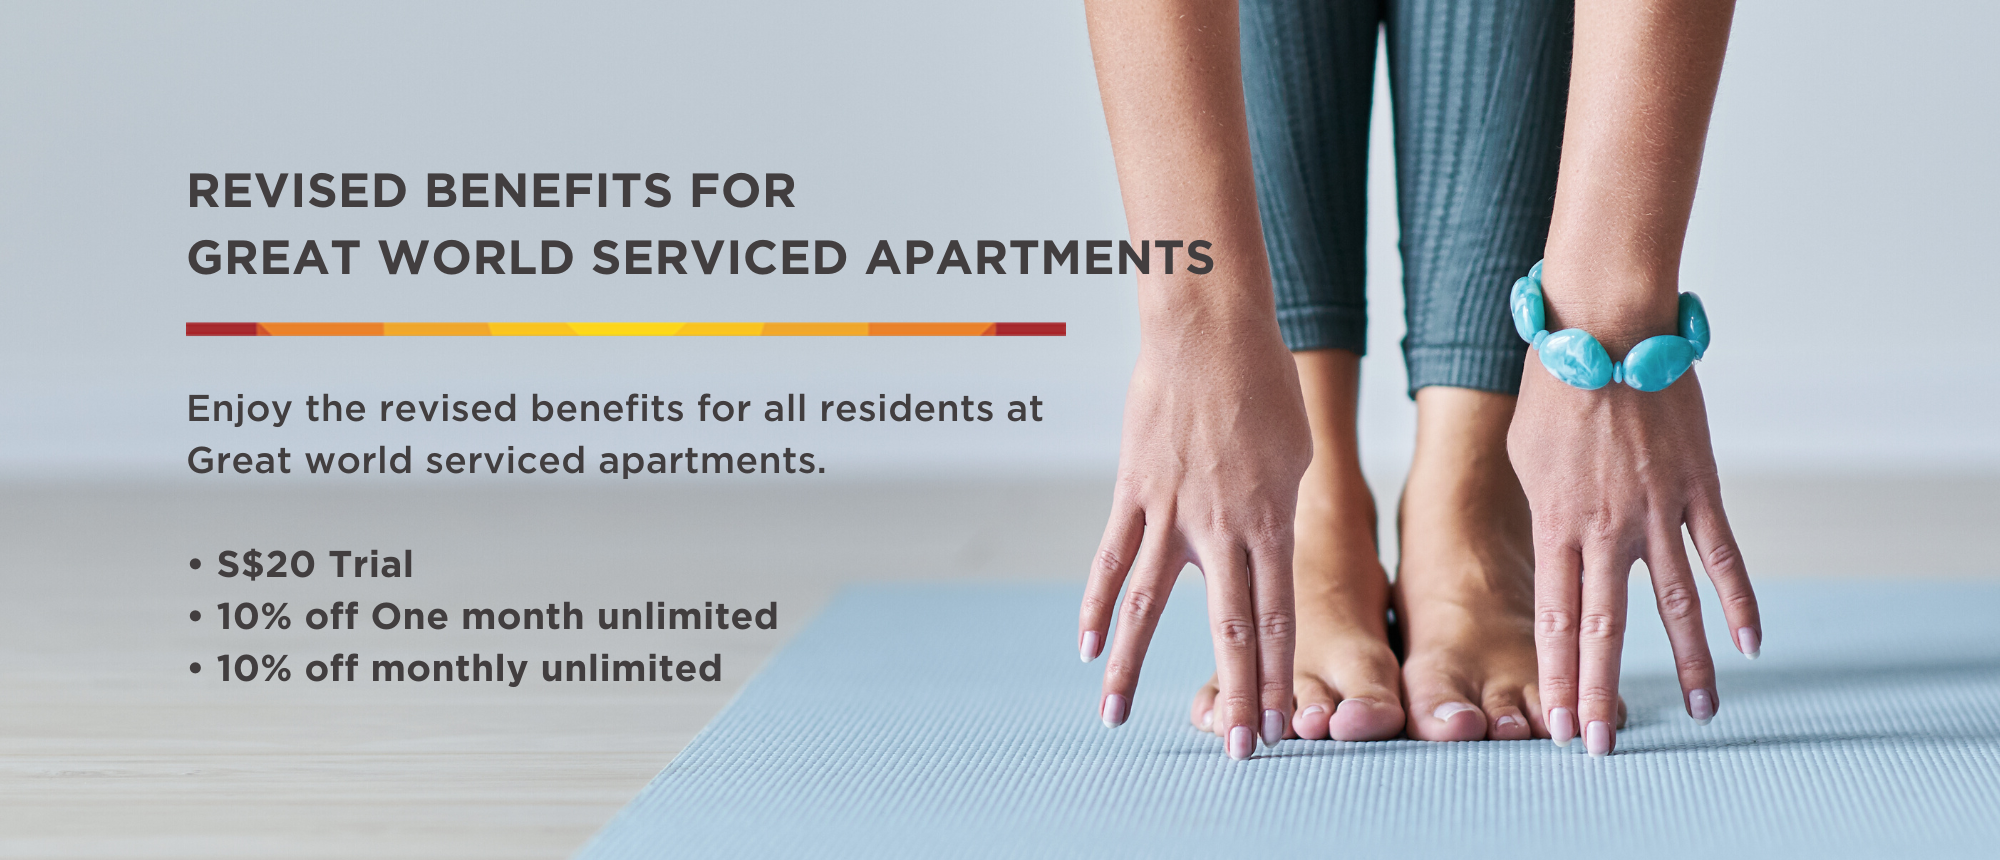 Promotions for Residents at Great World Serviced Apartments